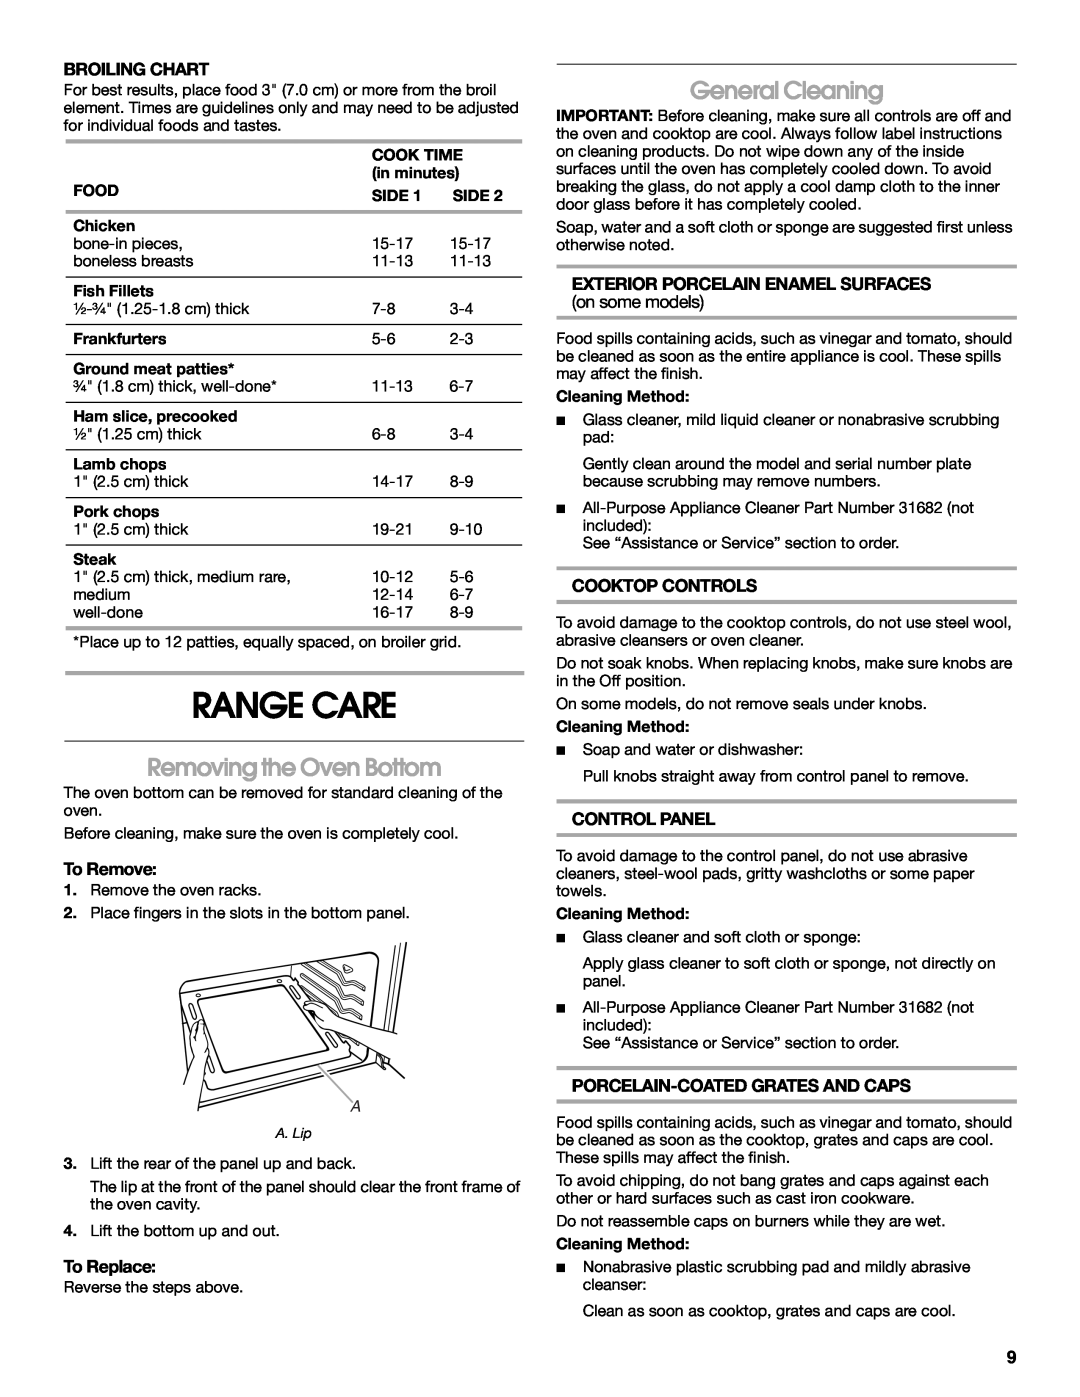 Estate W10173754A manual Range Care, Removing the Oven Bottom, General Cleaning, Broiling Chart, To Remove, To Replace 